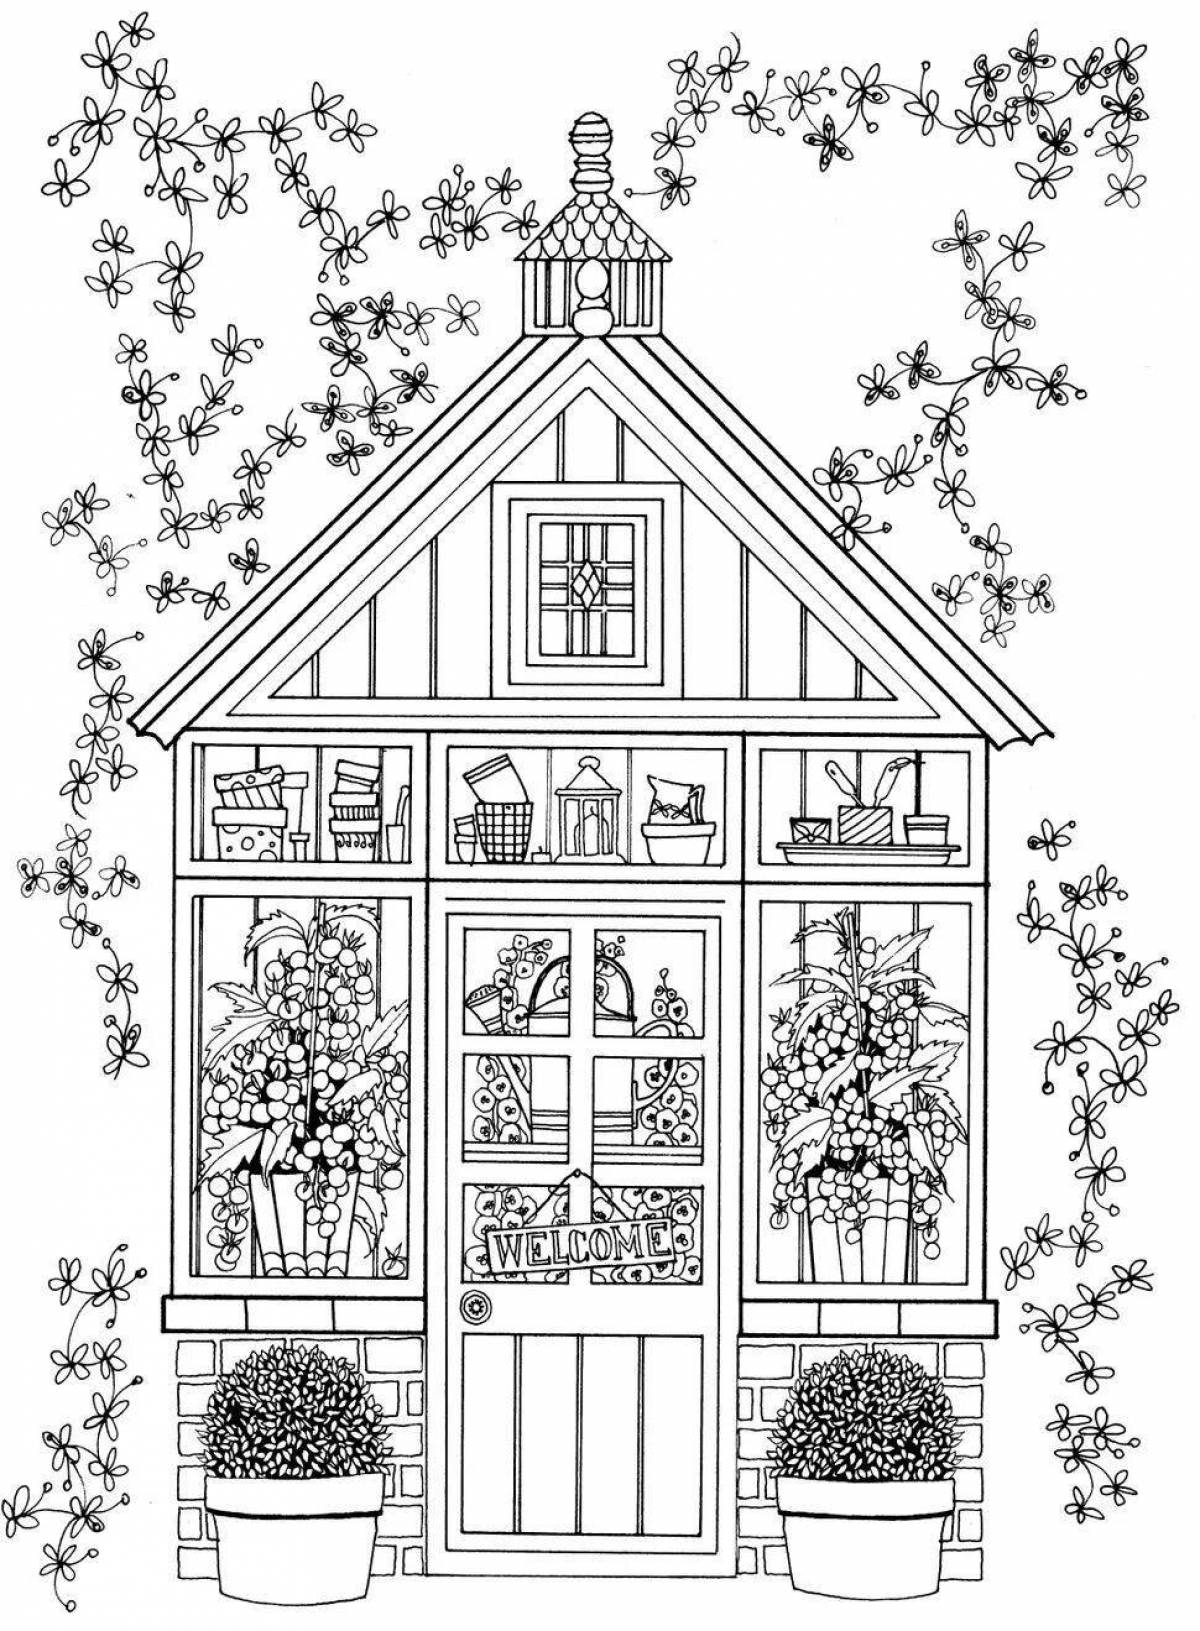 Coloring bright houses and flowers